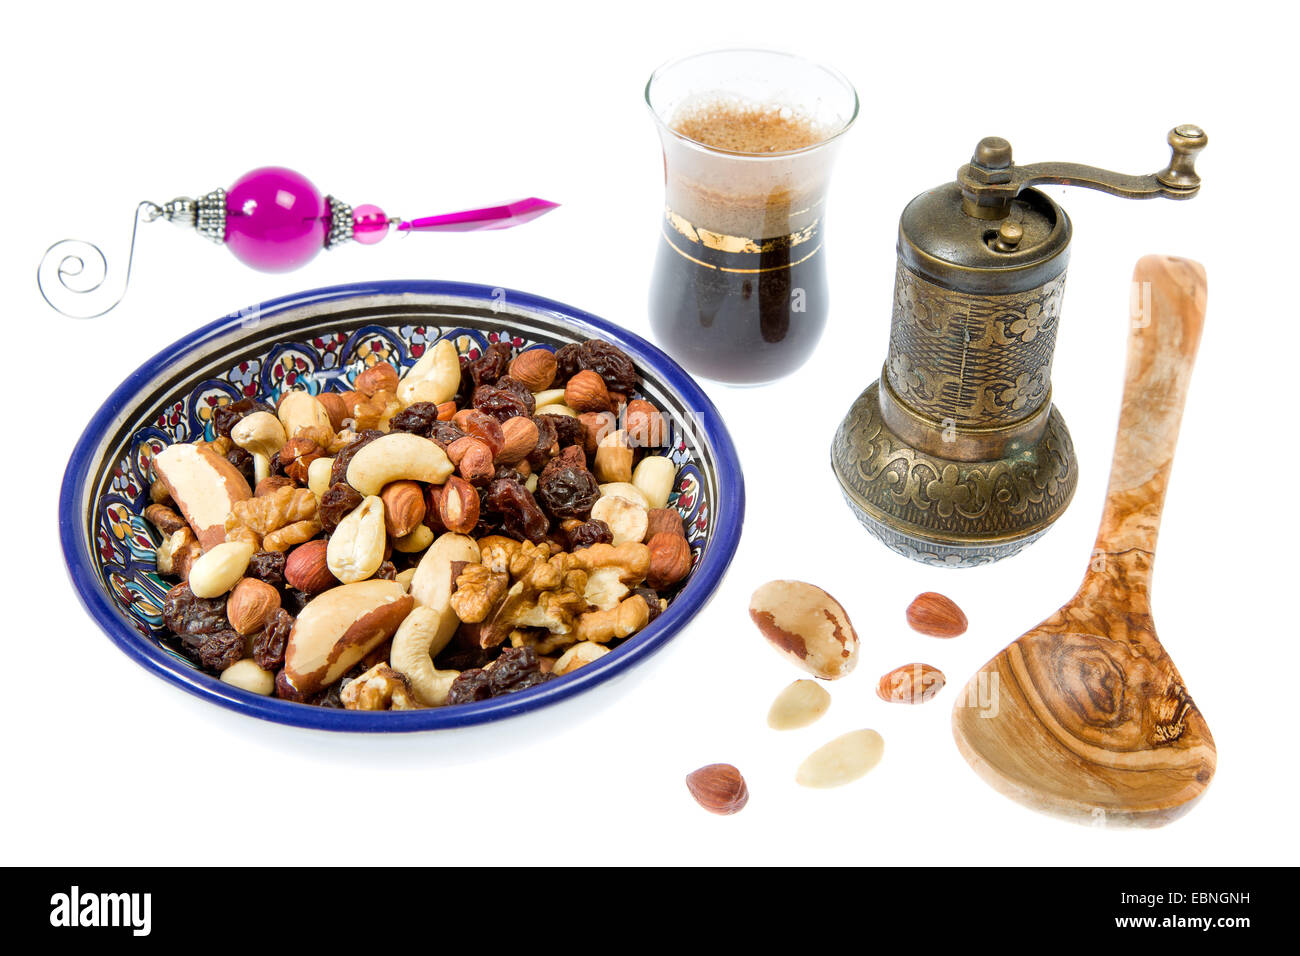 A mixture of nuts popular in Arab countries Stock Photo